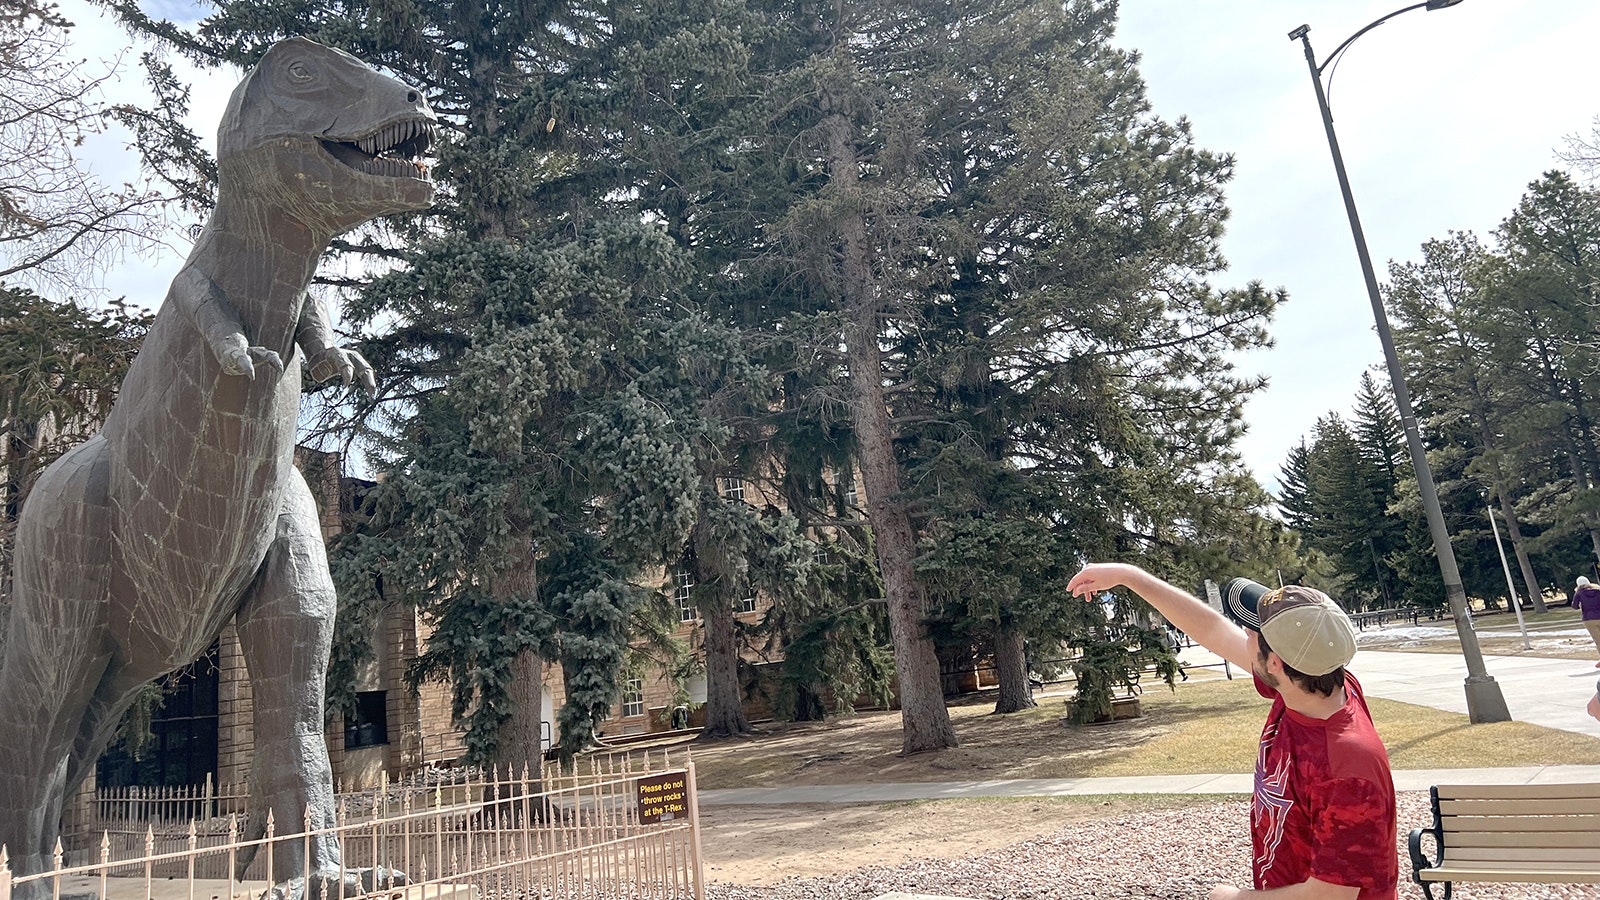 University of Wyoming geology student Andrew Wright tries to toss a pinecone into the mouth of “Rexy,” a life-sized Tyrannosaurus rex statue on campus.